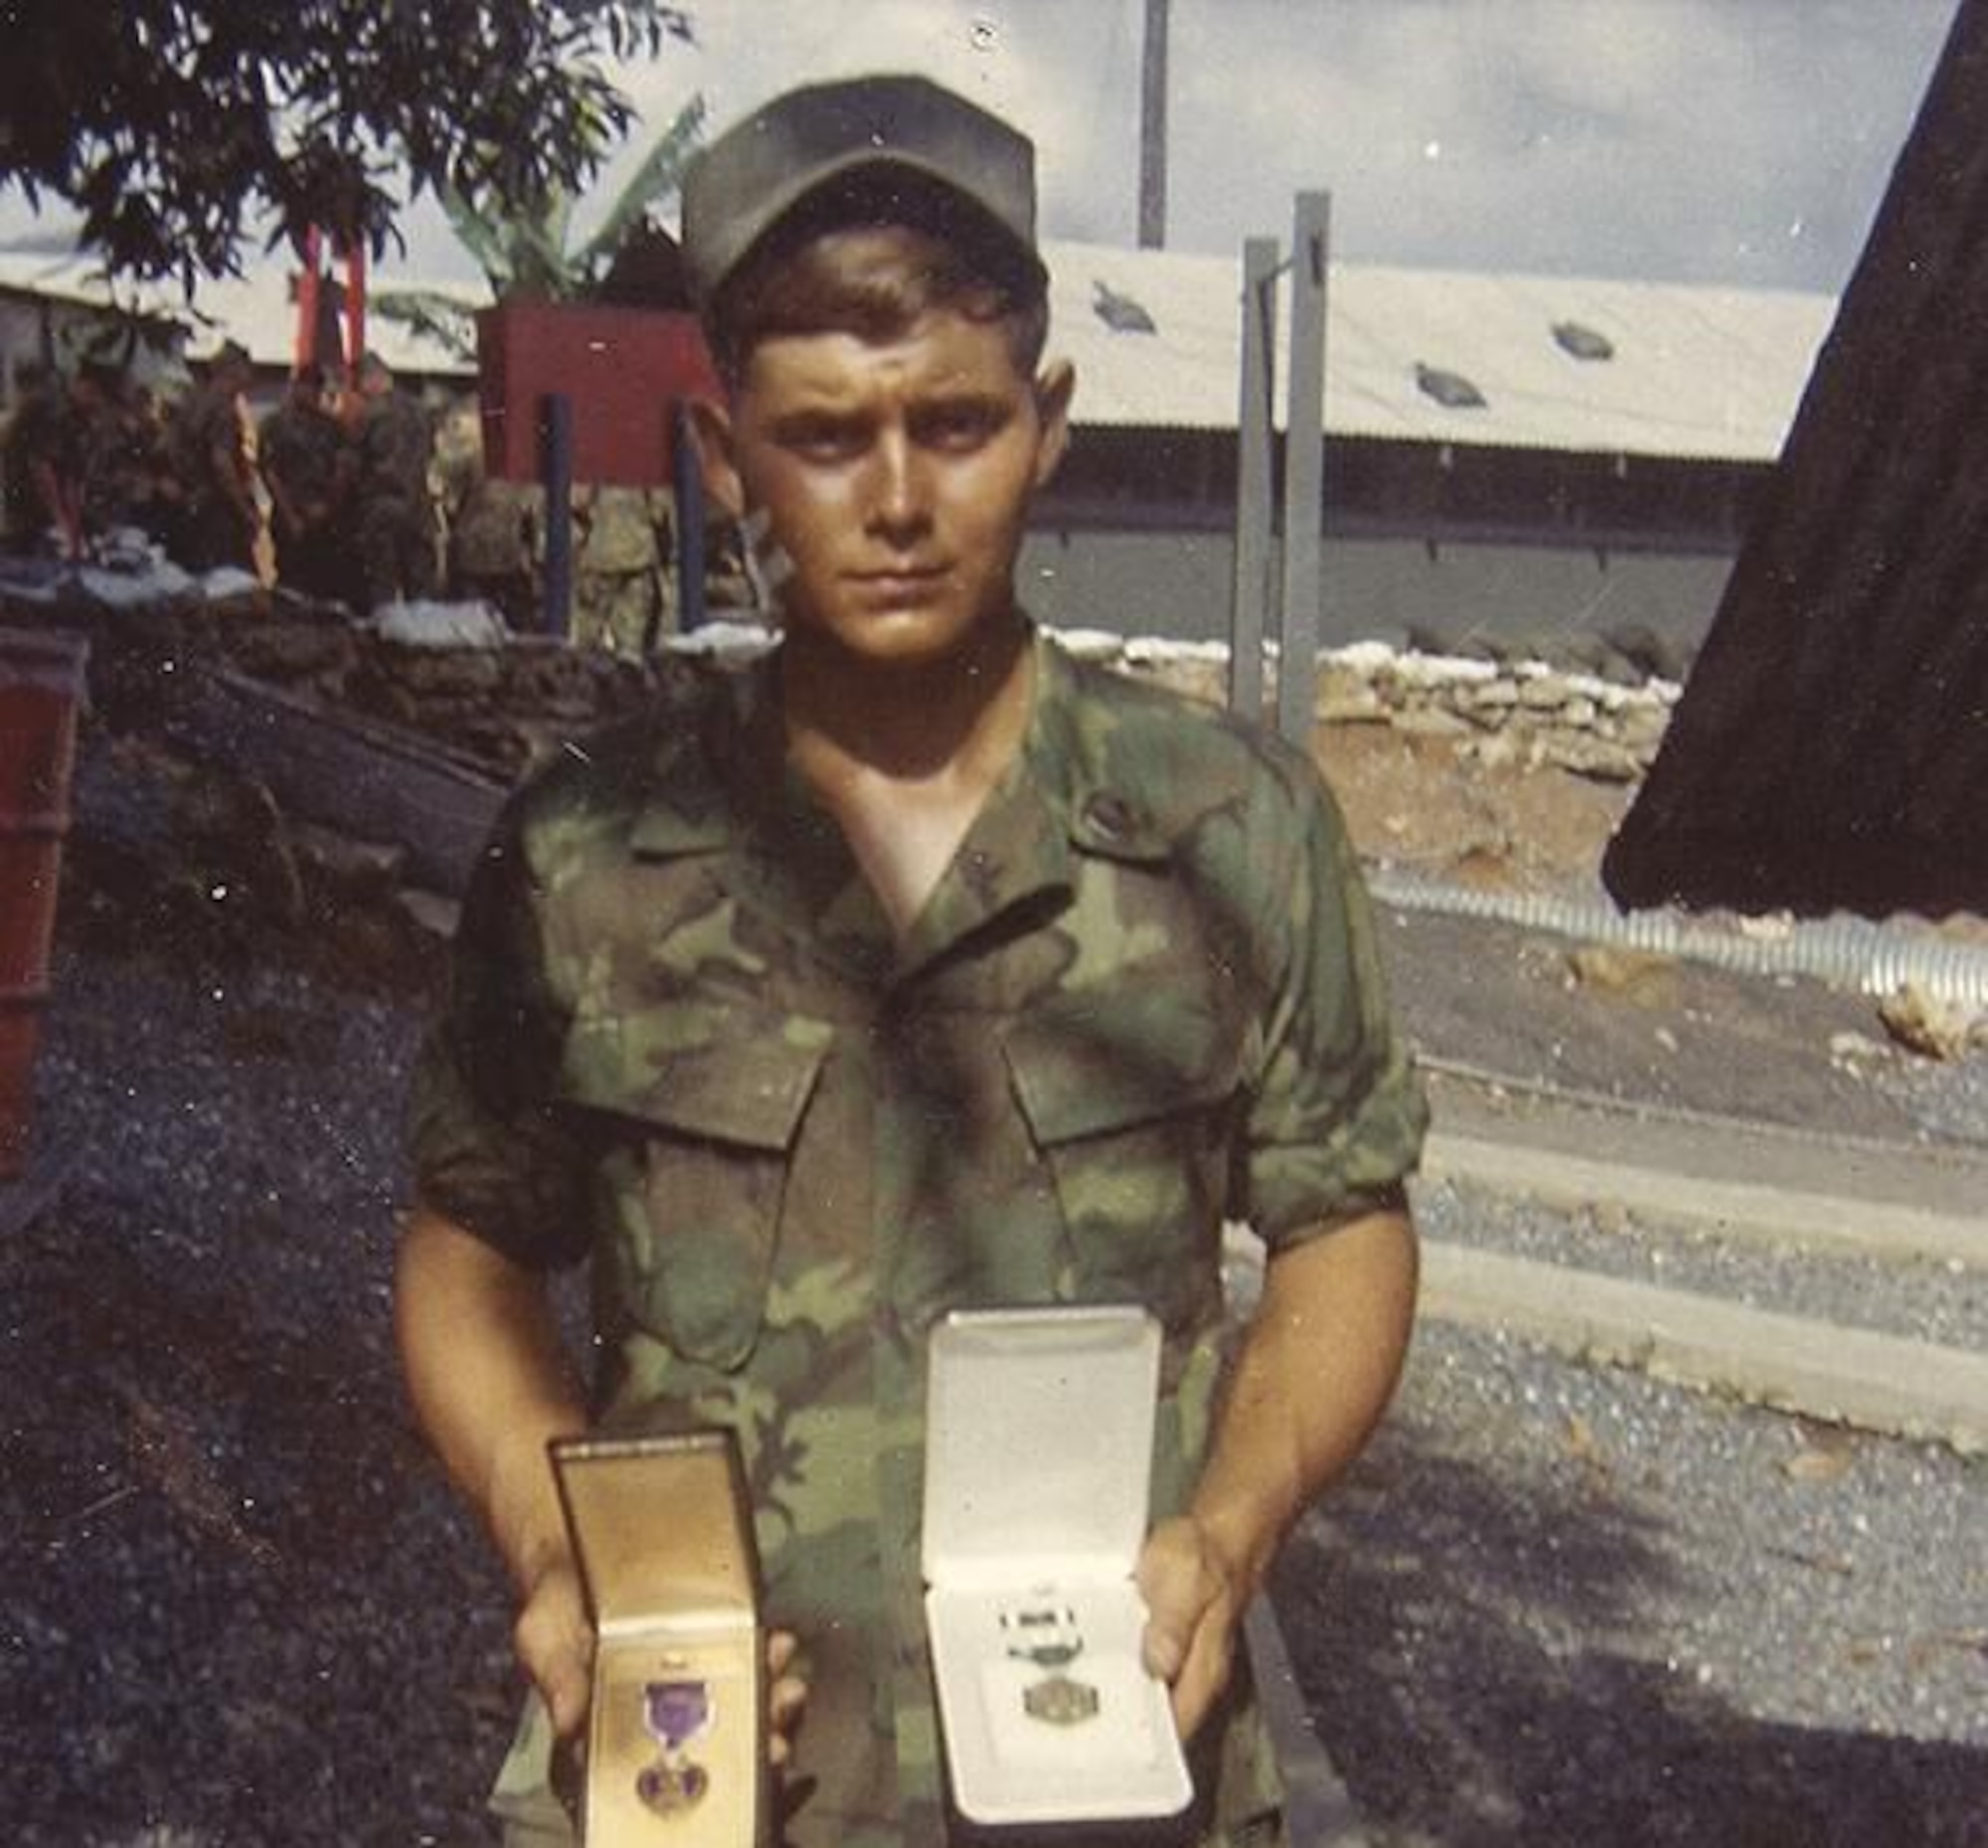 Navy corpsman Steve Vineyard displays the Purple Heart and Navy Commendation Medal he earned on July 30, 1969, while serving with the Marine 1st Reconnaissance Battalion in Quang Nam province. To train for his job in the war zone, Vineyard attended 16 weeks of Hospital Corps School, twice the time Army medics were provided. (Photo by Steve Vineyard)